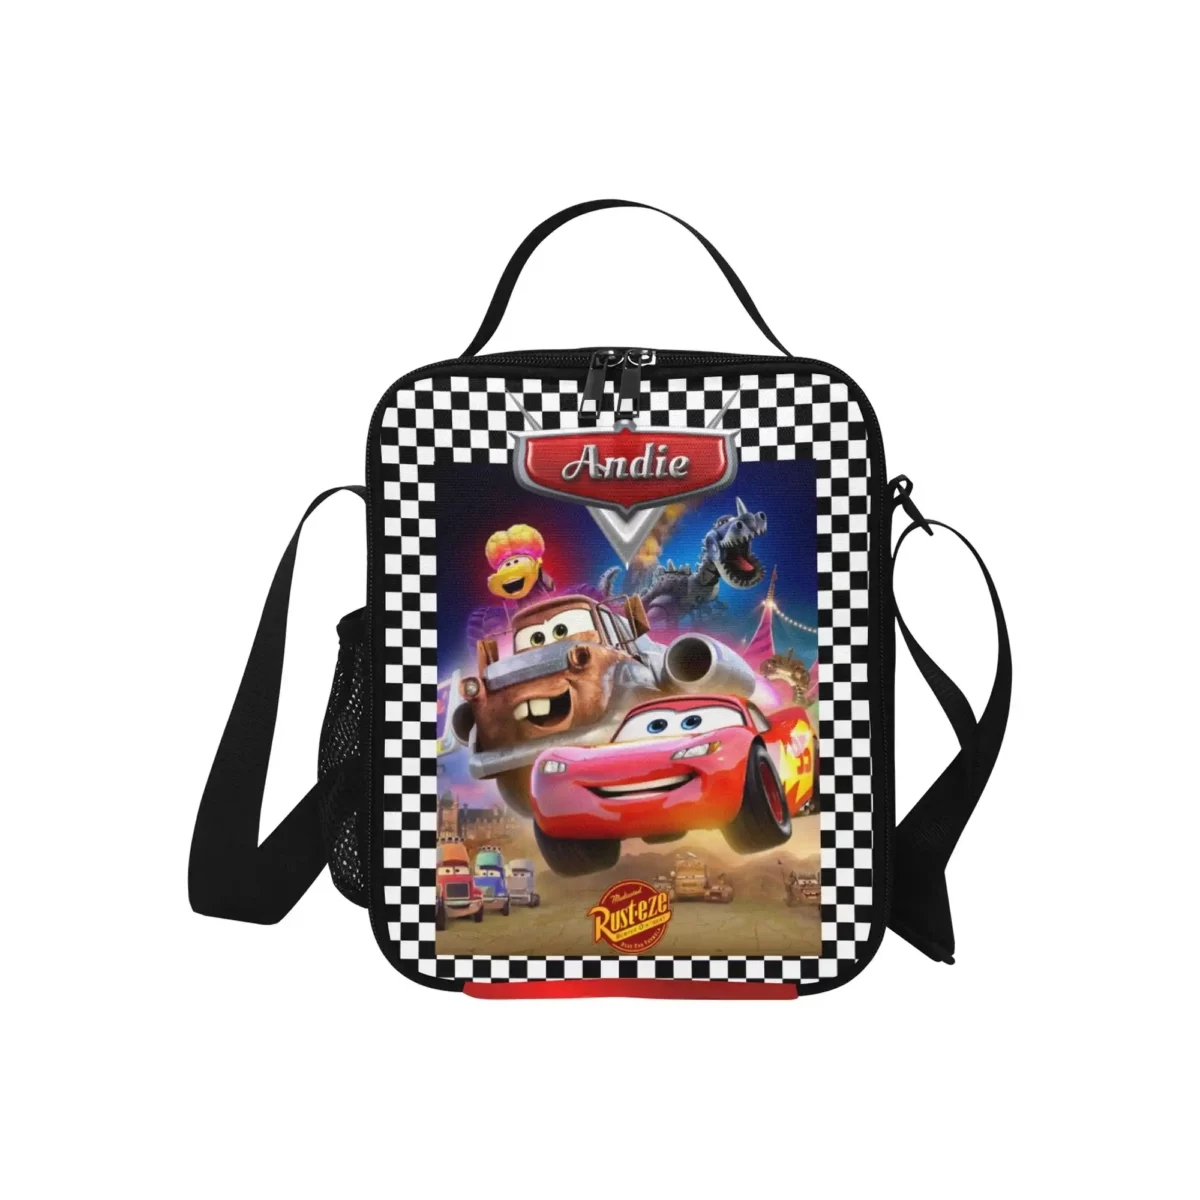 Personalized Lightning McQueen Lunch Bag for kids. Insulated interior Lunchbox from Cars Cartoon Cool Kiddo 16